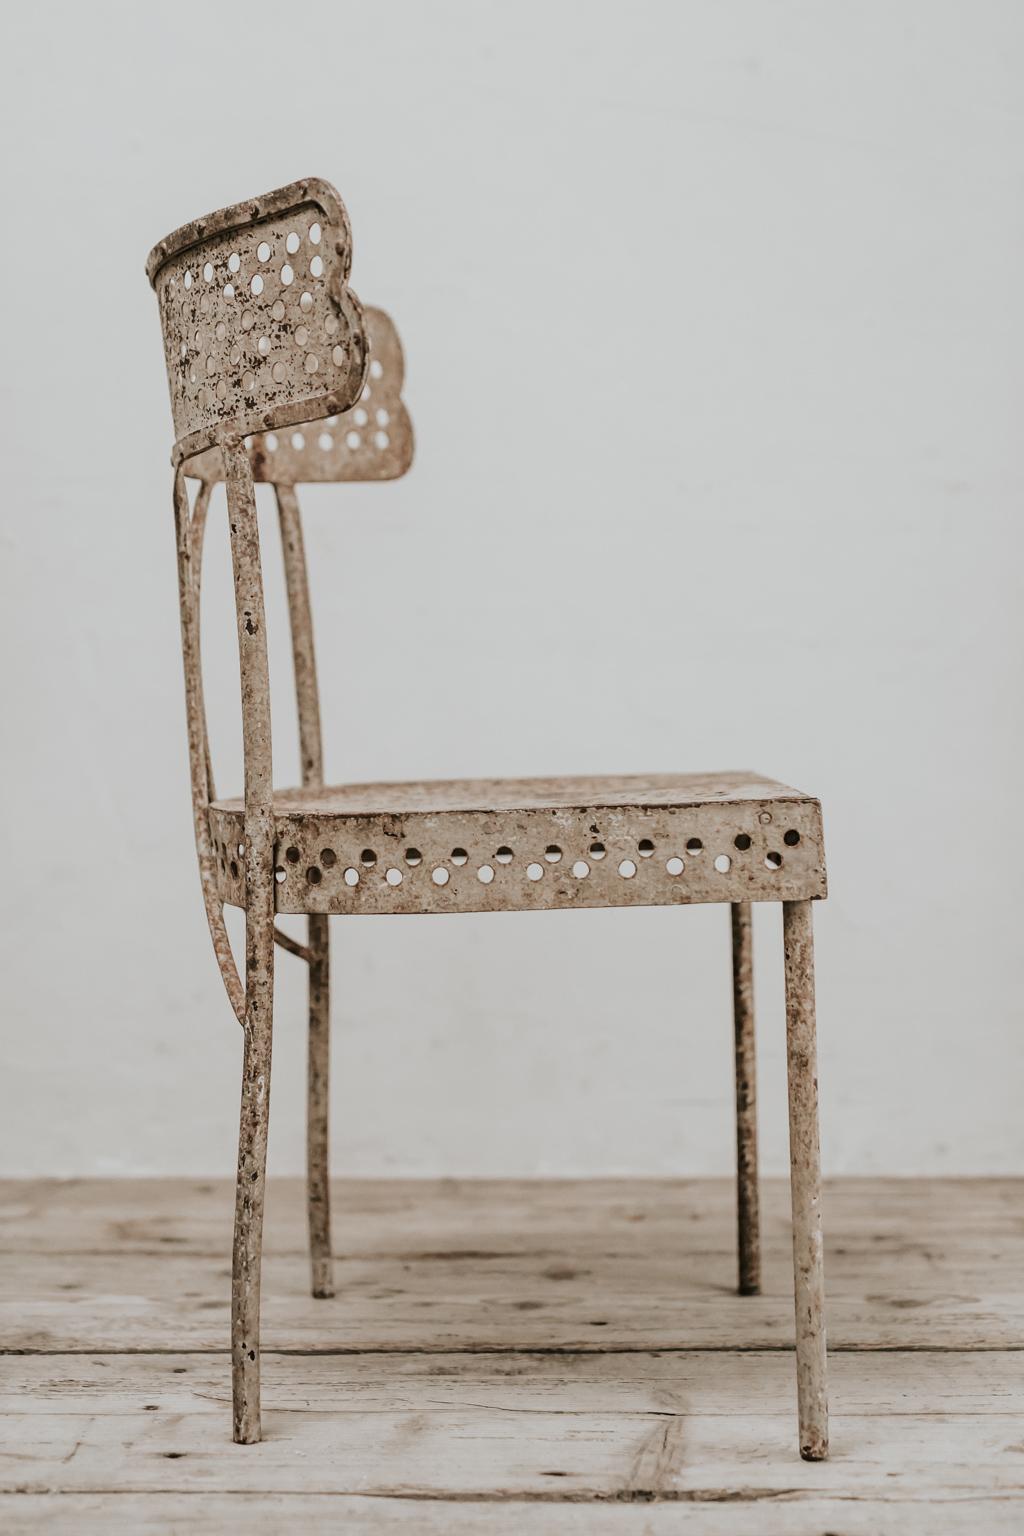 A quirky, very unusual model of a French iron garden chair, can be used inside or outside, great charm!